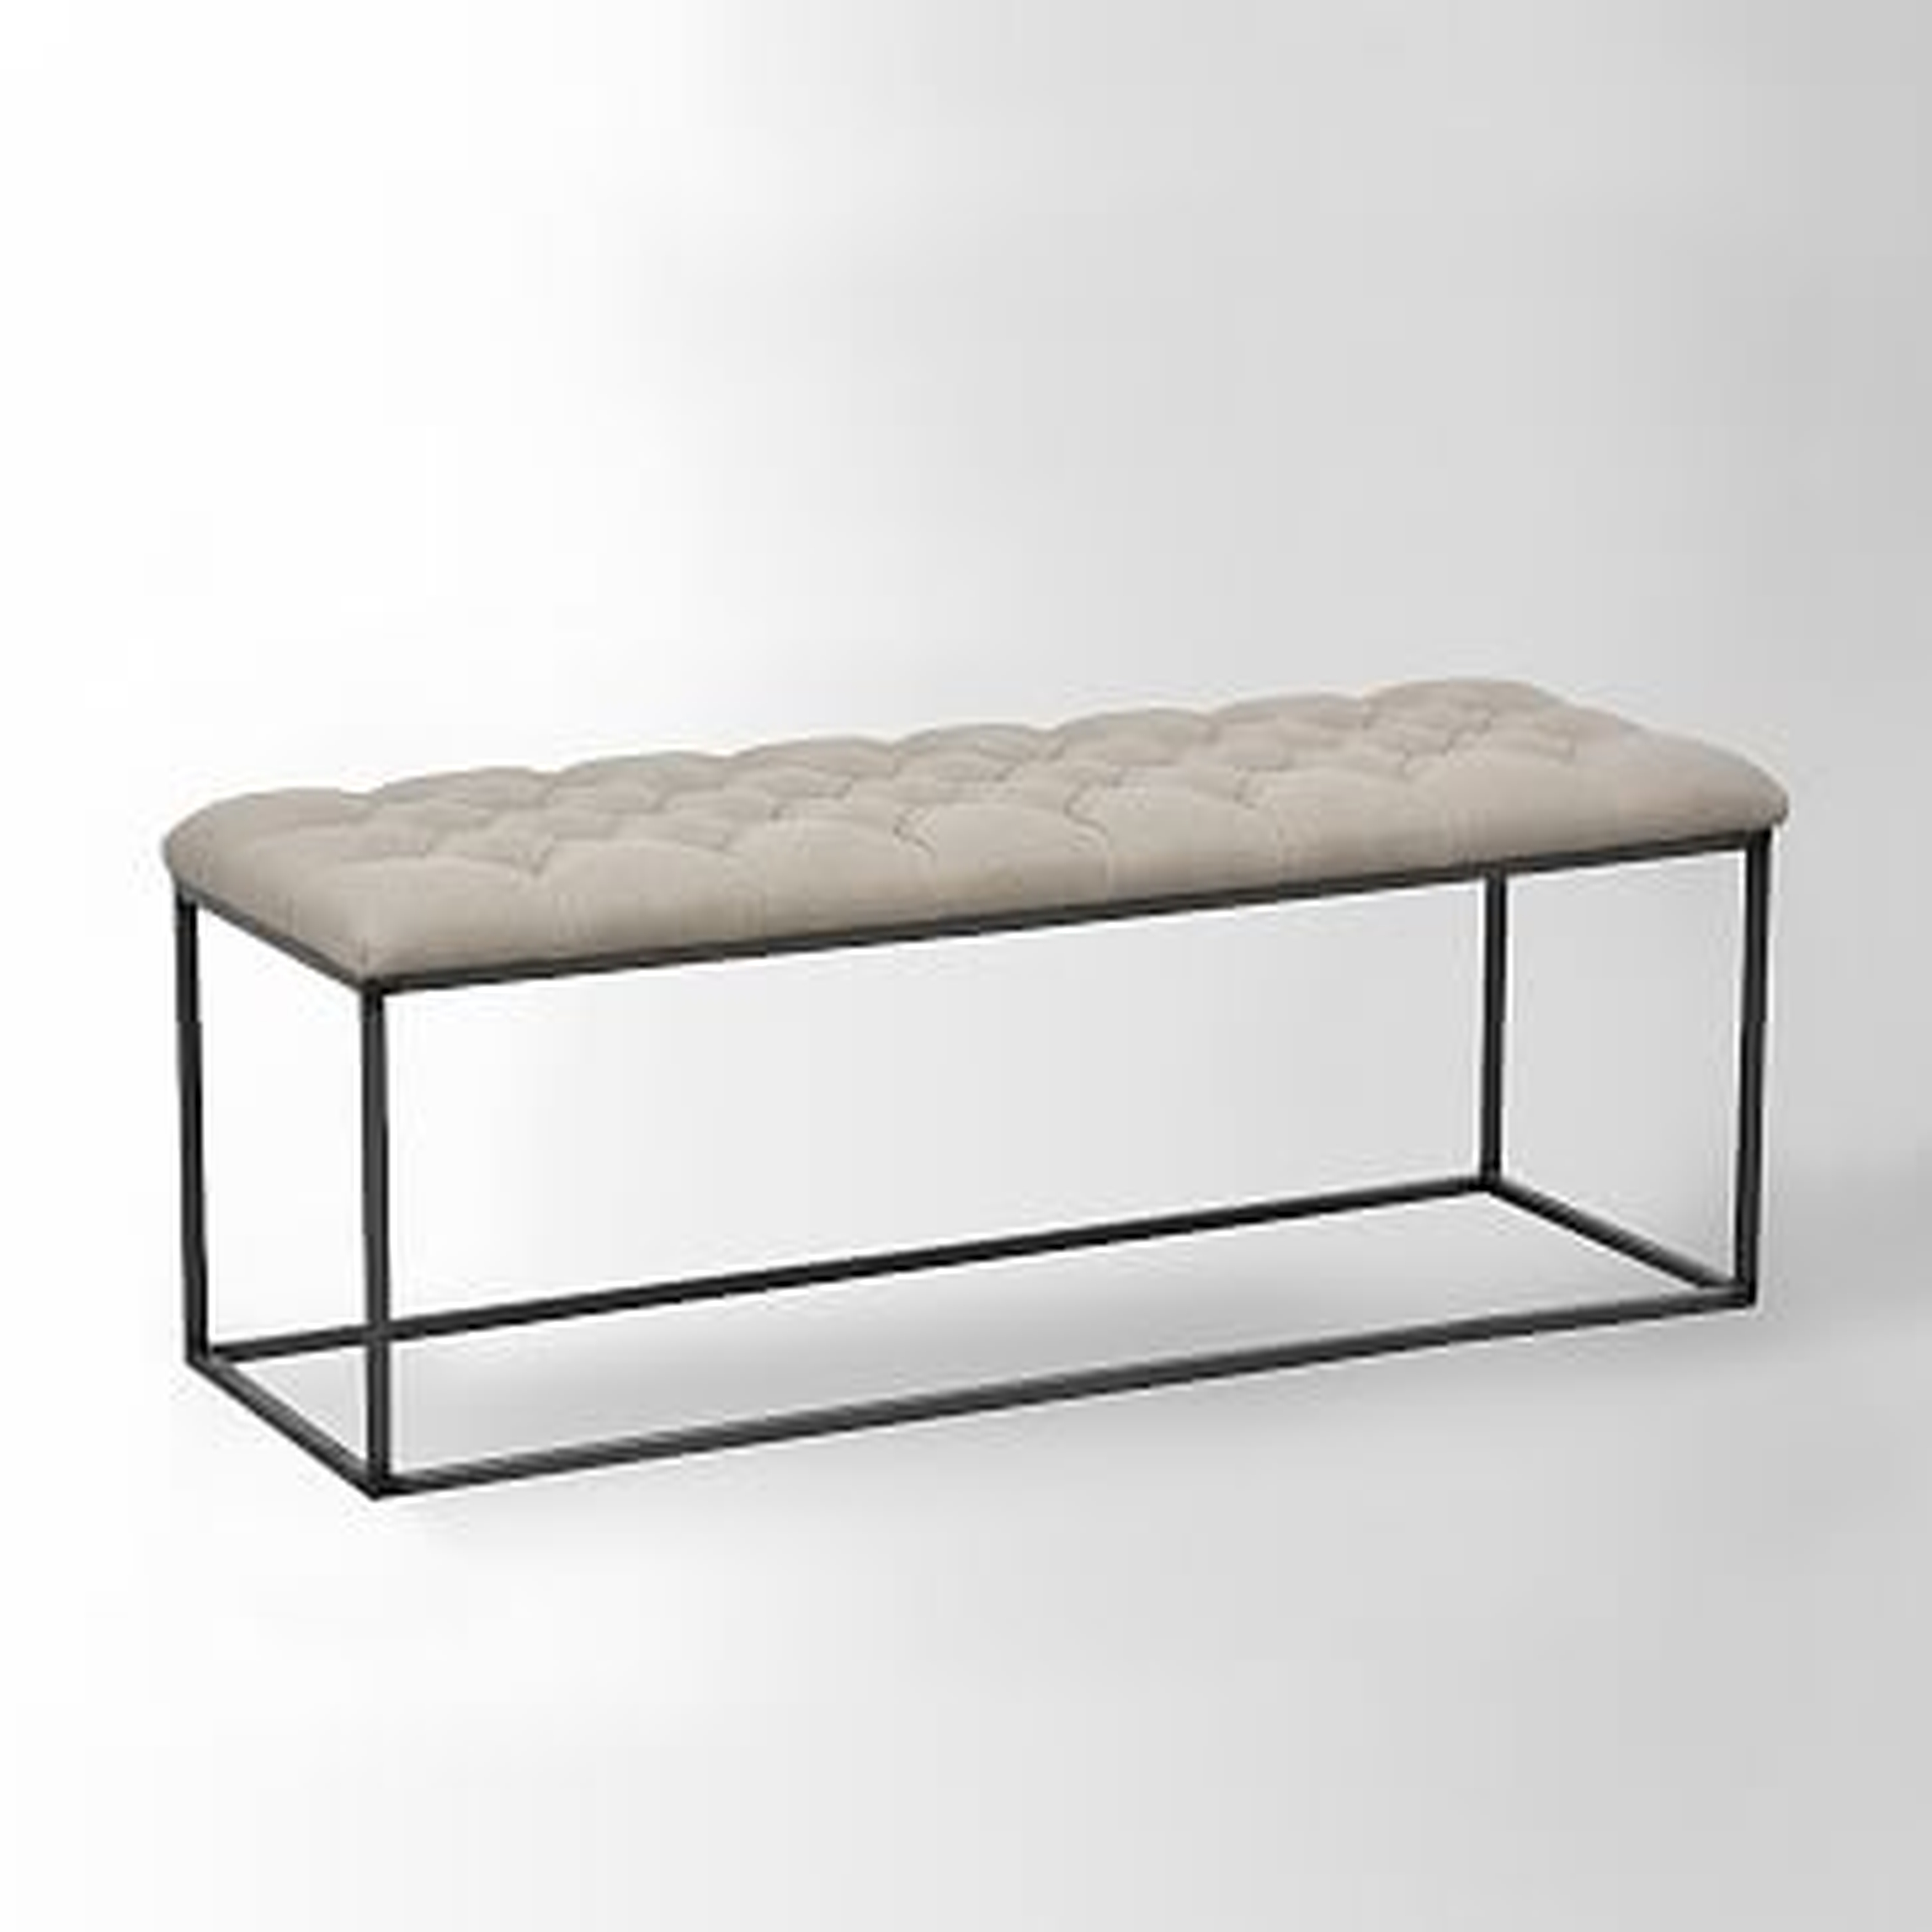 Tufted Bench - Flax - West Elm